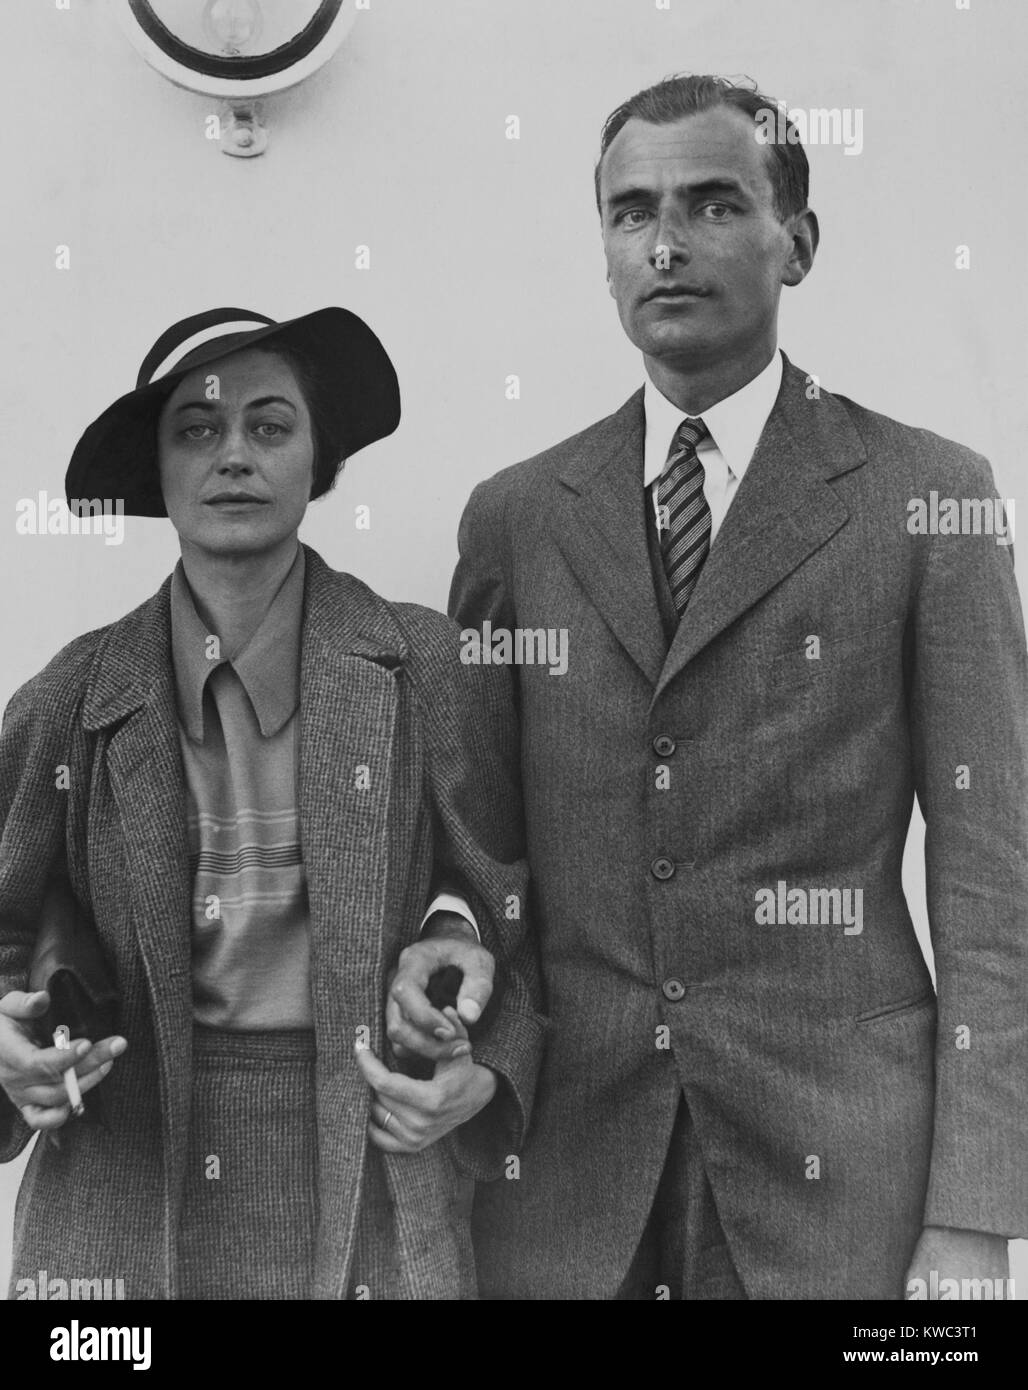 Herbert S. Agar arriving in New York on the S.S. Olympic, with his wife, June 5, 1934. Ager won the 1934 Pulitzer Prize for Biography for THE PEOPLE'S CHOICE, a study of the six early U.S. Presidents. His wife, Eleanor Carroll Chilton was the author of two novels, SHADOWS WAITING, 1926, and BURNING FOUNTAIN, 1929. (BSLOC 2015 14 182) Stock Photo